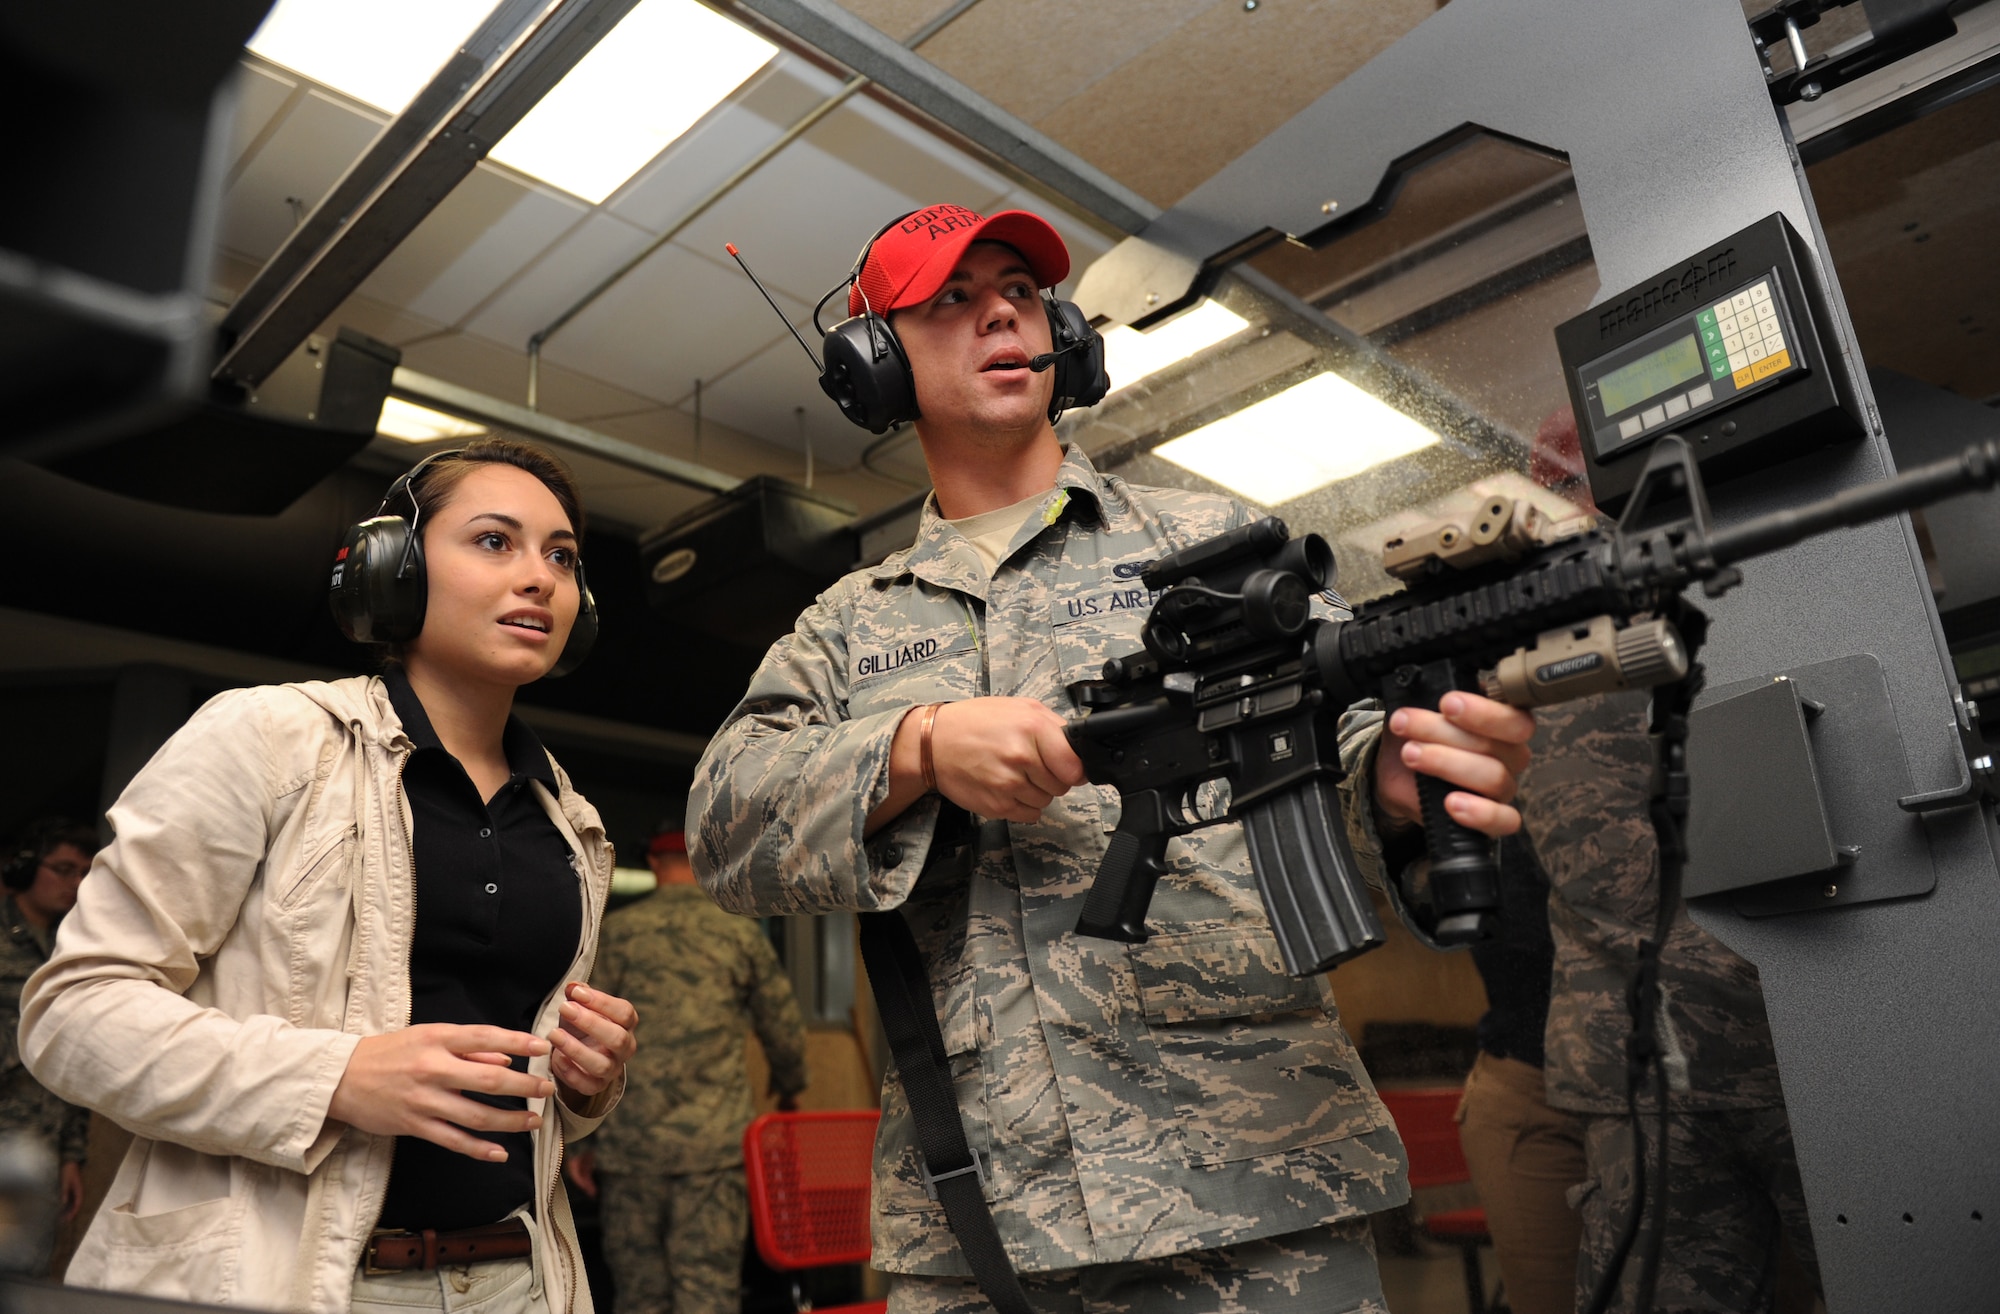 Gabriela Valle-Ramos, University of Alabama Air Force ROTC Cadet, receives M-4 weapon operating instructions from Senior Airman Caleb Gilliard, 81st Security Forces Squadron combat arms instructor, at the 81st SFS combat arms training and maintenance building during Pathways to Blue April 15, 2016, Keesler Air Force Base, Miss. Pathways to Blue, a diversity outreach event hosted by 2nd Air Force, the 81st Training Wing and the 403rd Wing, included more than 180 cadets from Air Force ROTC detachments from various colleges and universities. Cadets received hands-on briefings on technical and flying operations and an orientation flight in support of the Air Force's Diversity Strategic Roadmap program. (U.S. Air Force photo by Kemberly Groue)